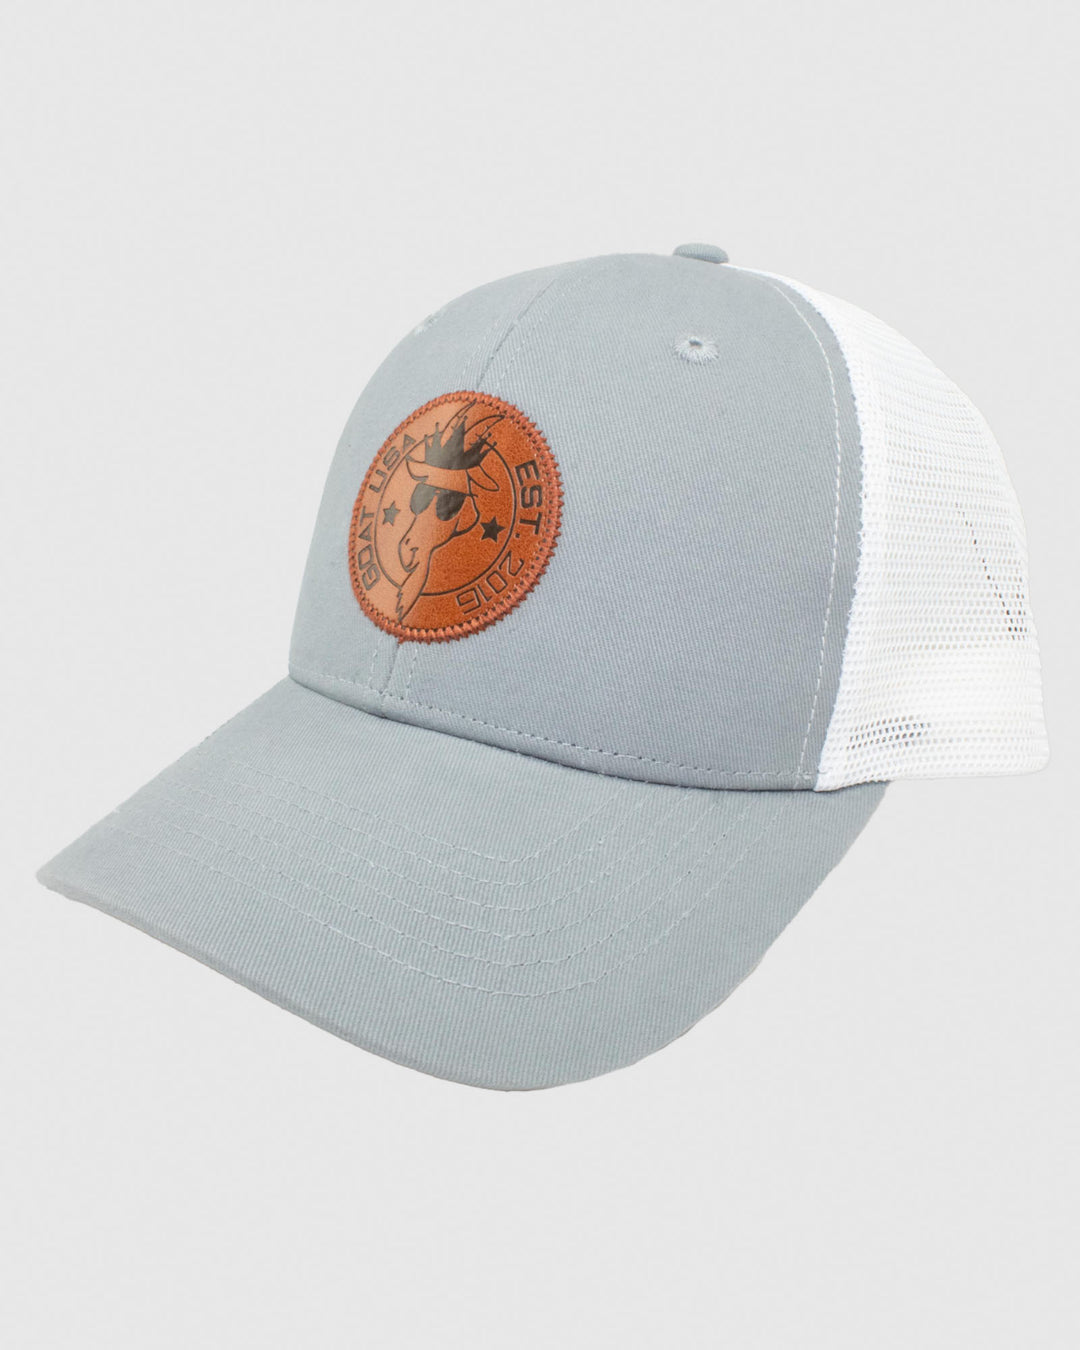 Gray hat with white mesh and brown leather patch#color_charcoal